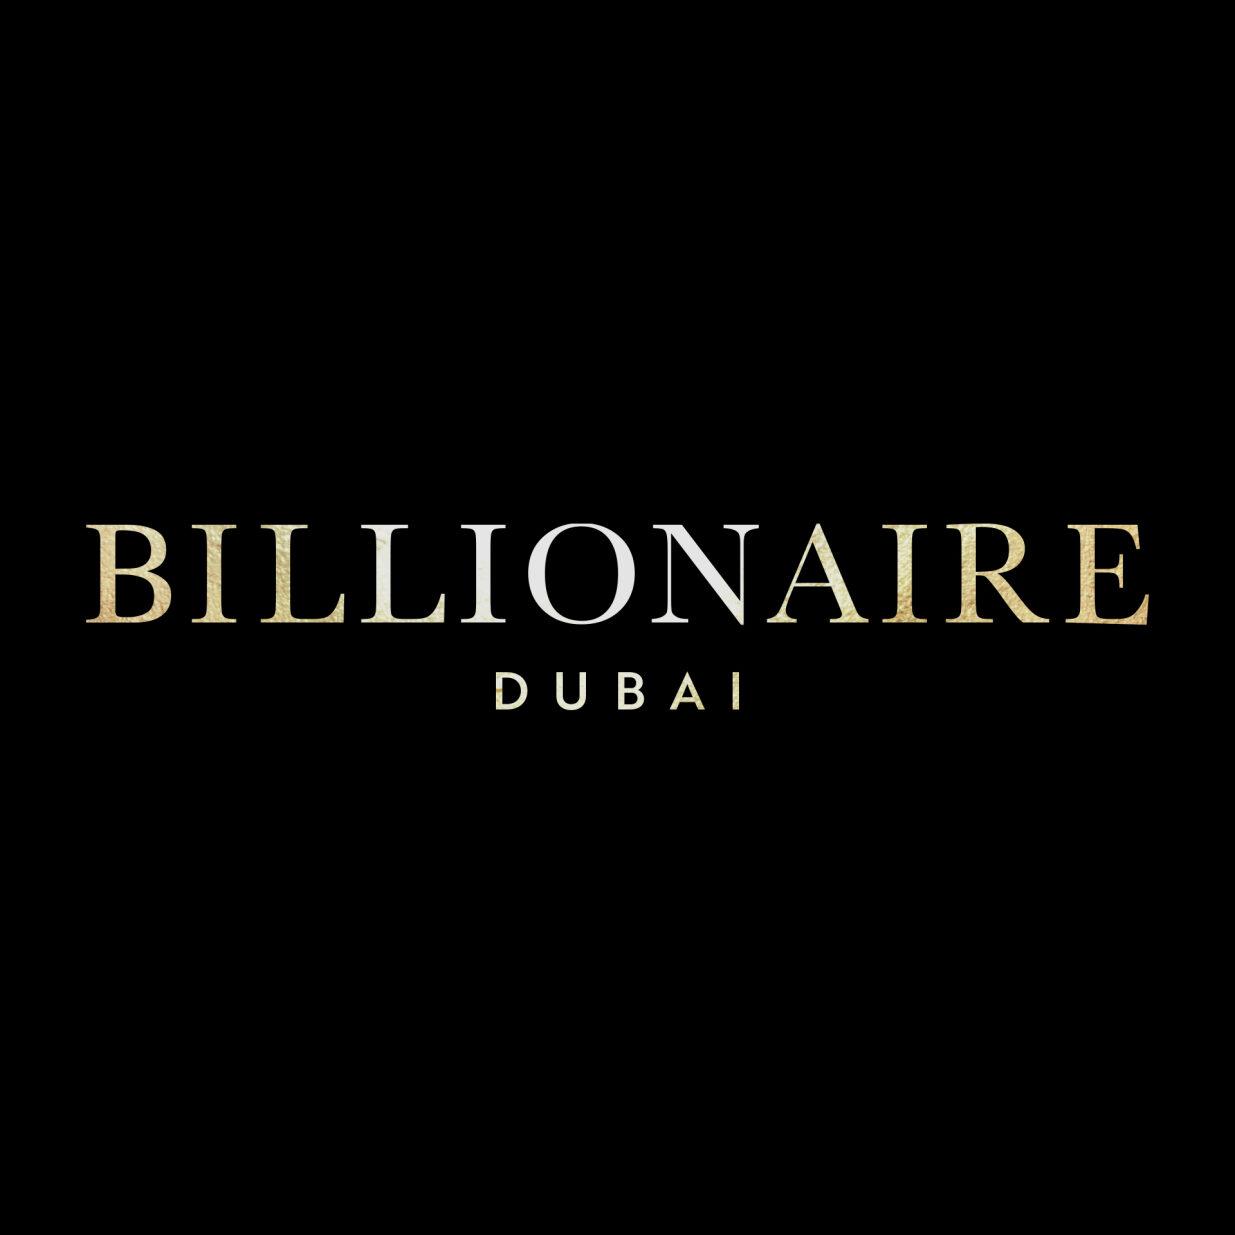 The Billionaire Brunch | Every Friday